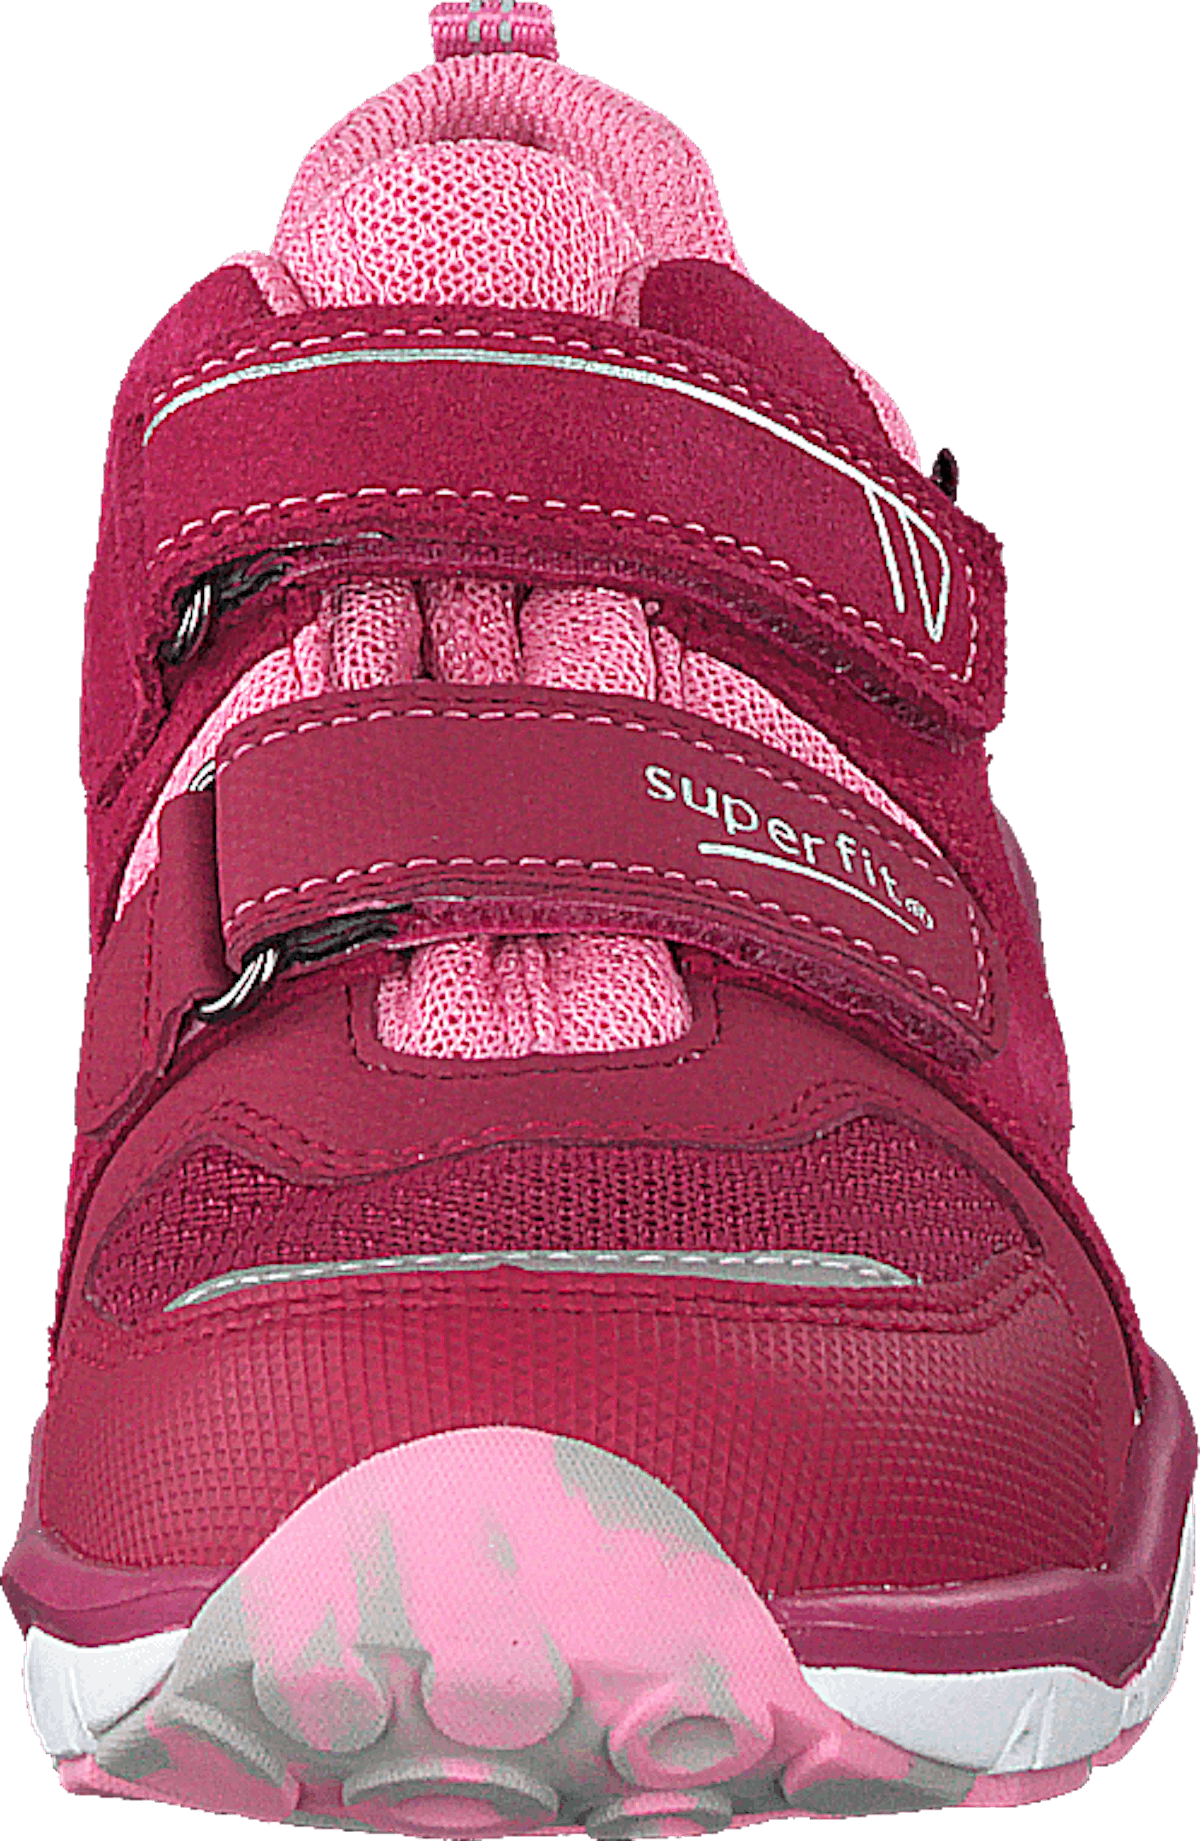 Sport5 Red/pink